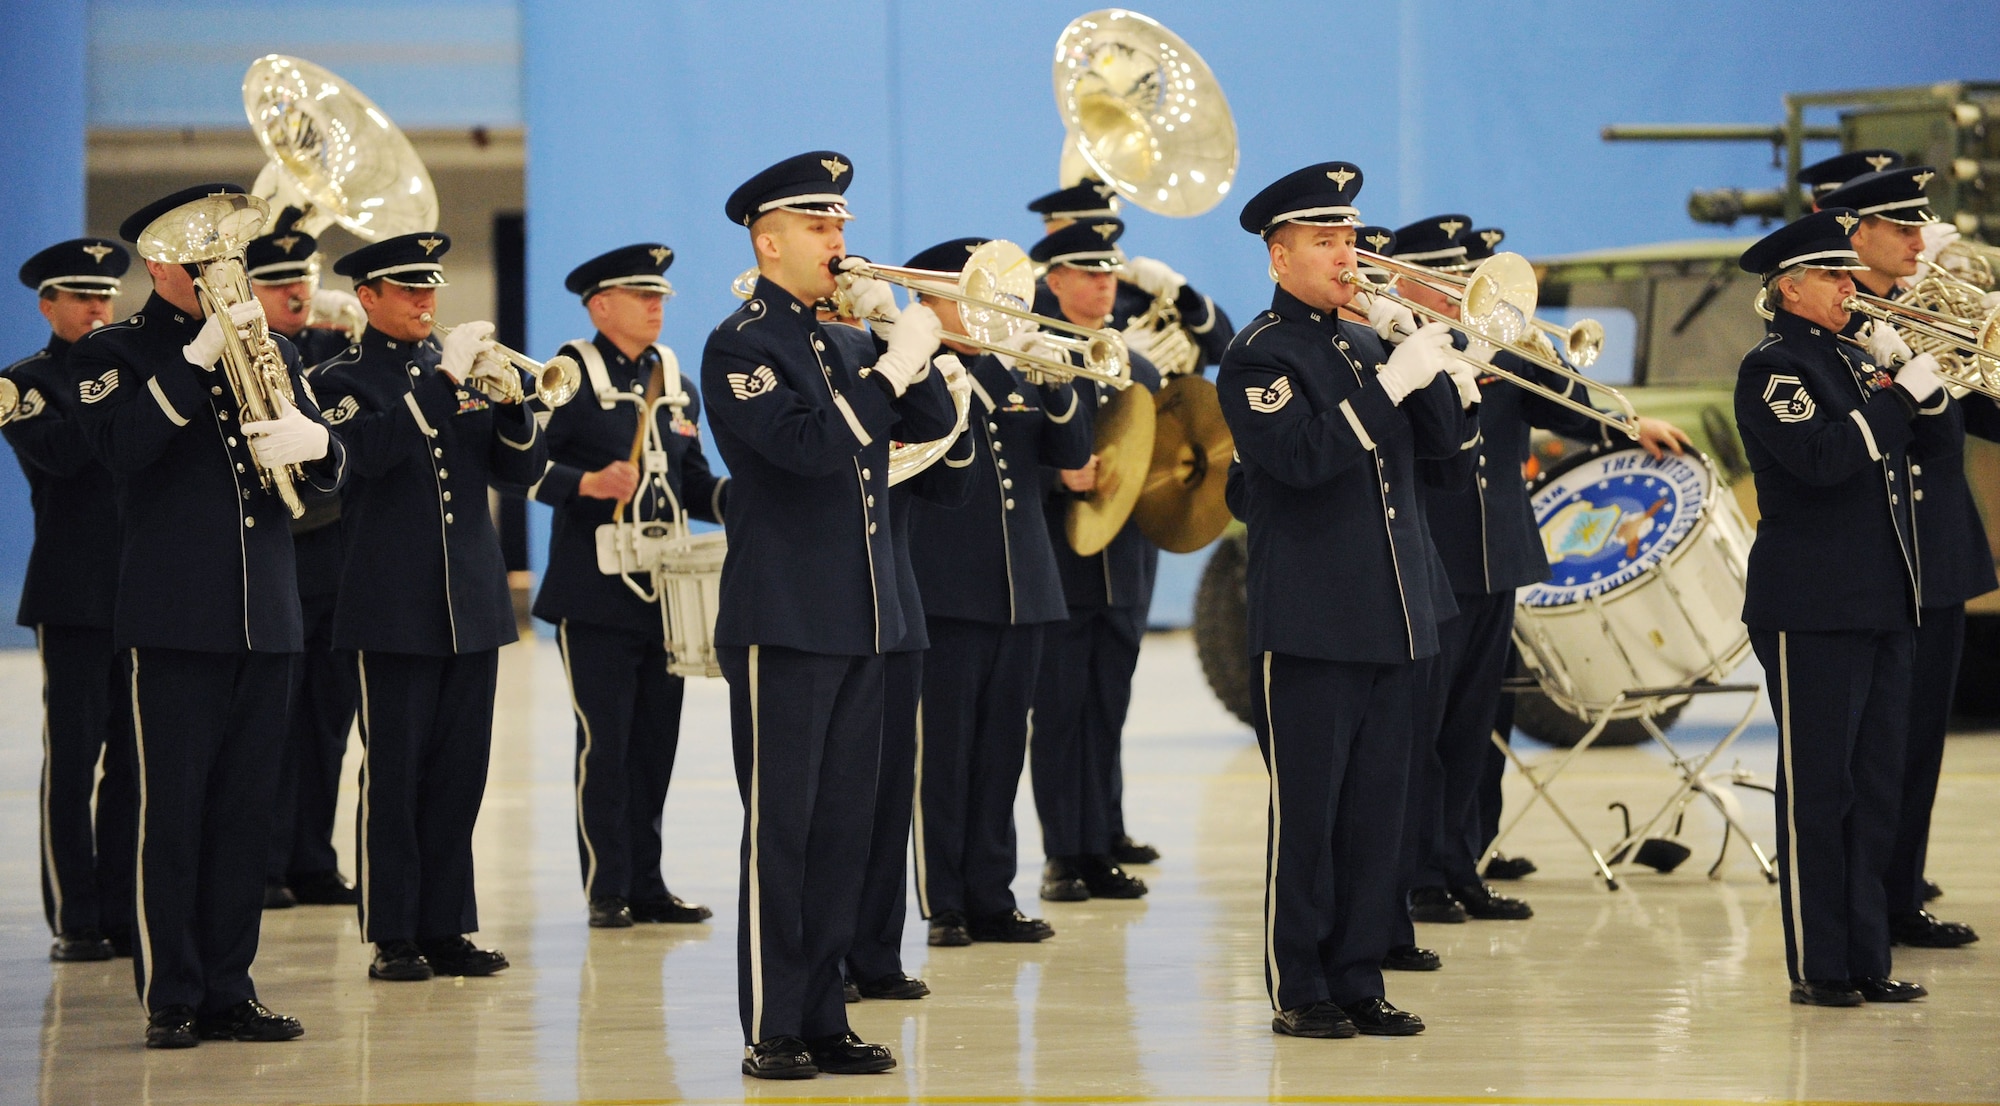 Members of the U.S. Air Force Band play the National Anthem during the Chief Master Sergeant. of the Air Force Transition Ceremony at Joint Base Andrews, Md., Jan. 24, 2013. Chief Master Sgt. James A. Cody became the 17th CMSAF following the retirement of CMSAF James A. Roy. Roy's retirement culminated more than 30 years of service. (U.S. Air Force photo/ Staff Sgt. Nichelle Anderson)